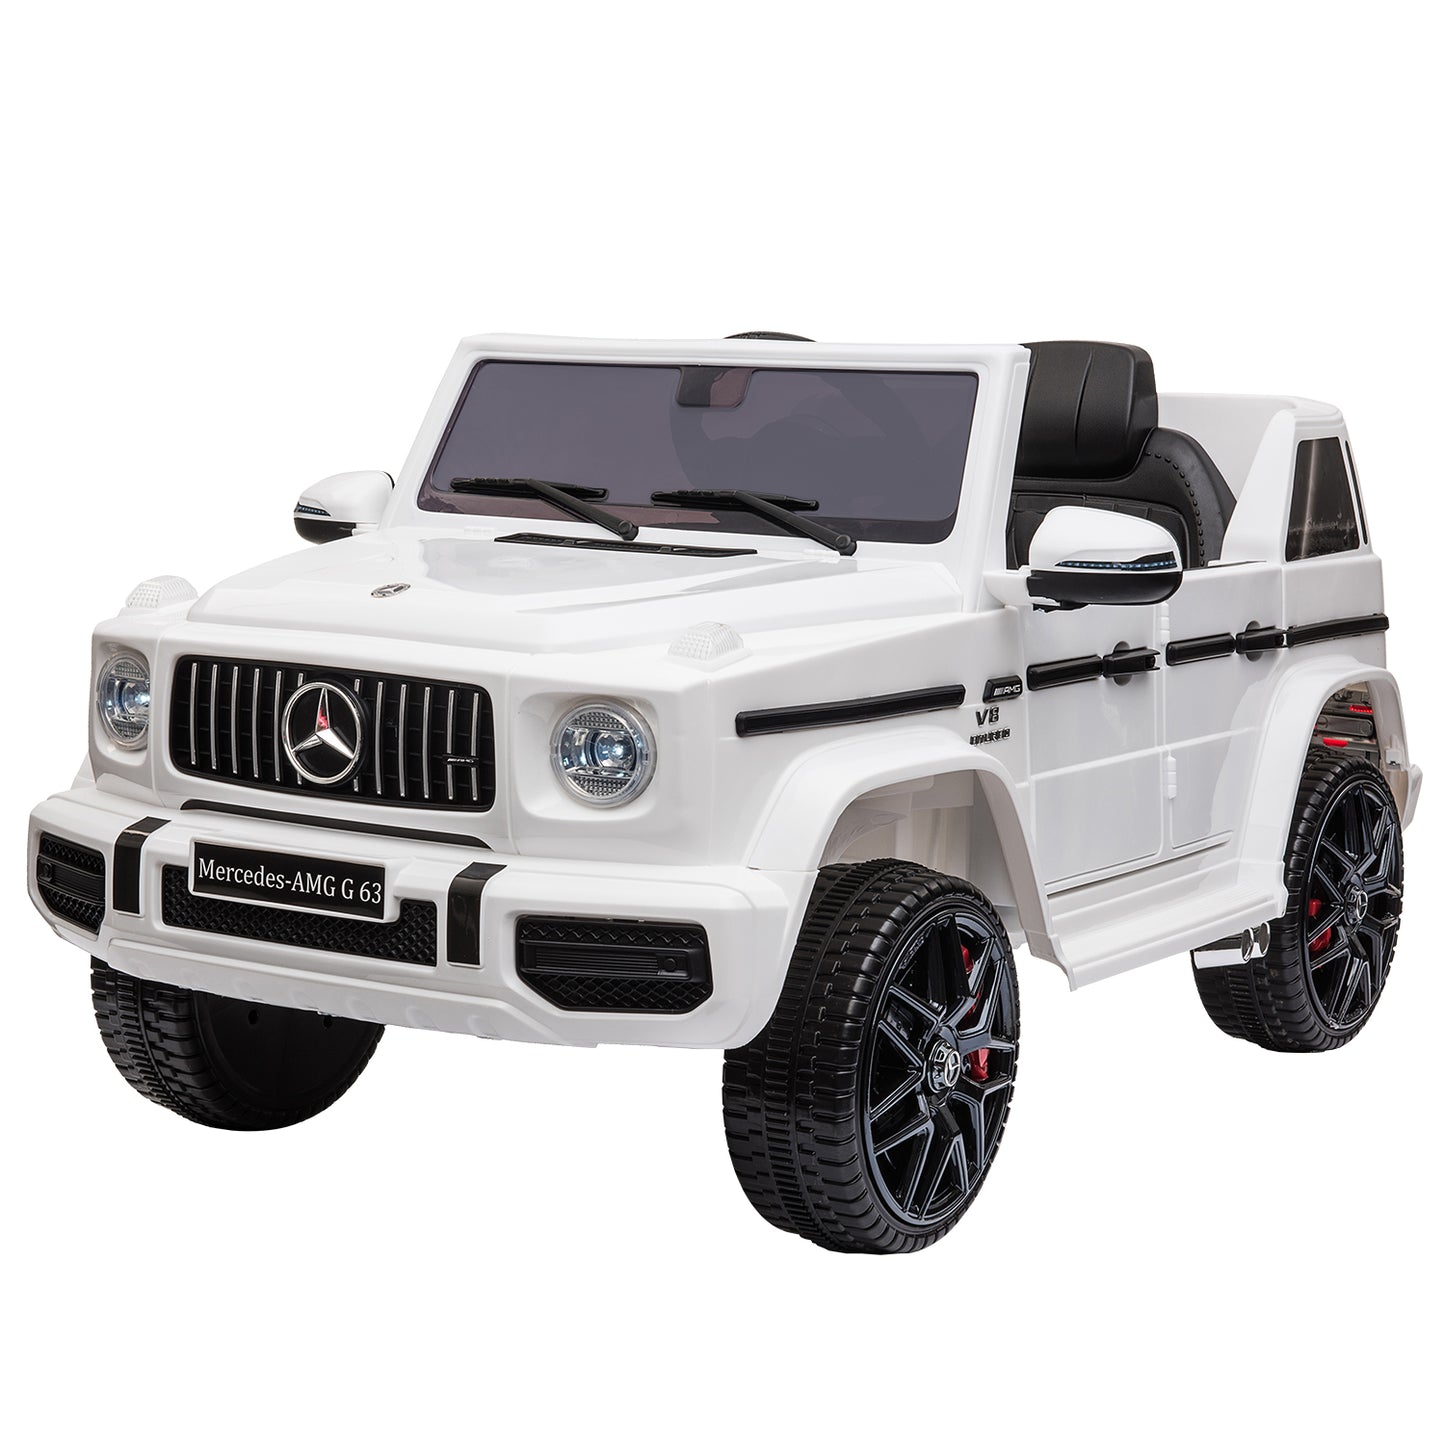 12V Kids Ride On Car Mercedes G Wagon with Remote Control, 3 Speeds, LED Lights, Music Story Playing, MP3 Player, White